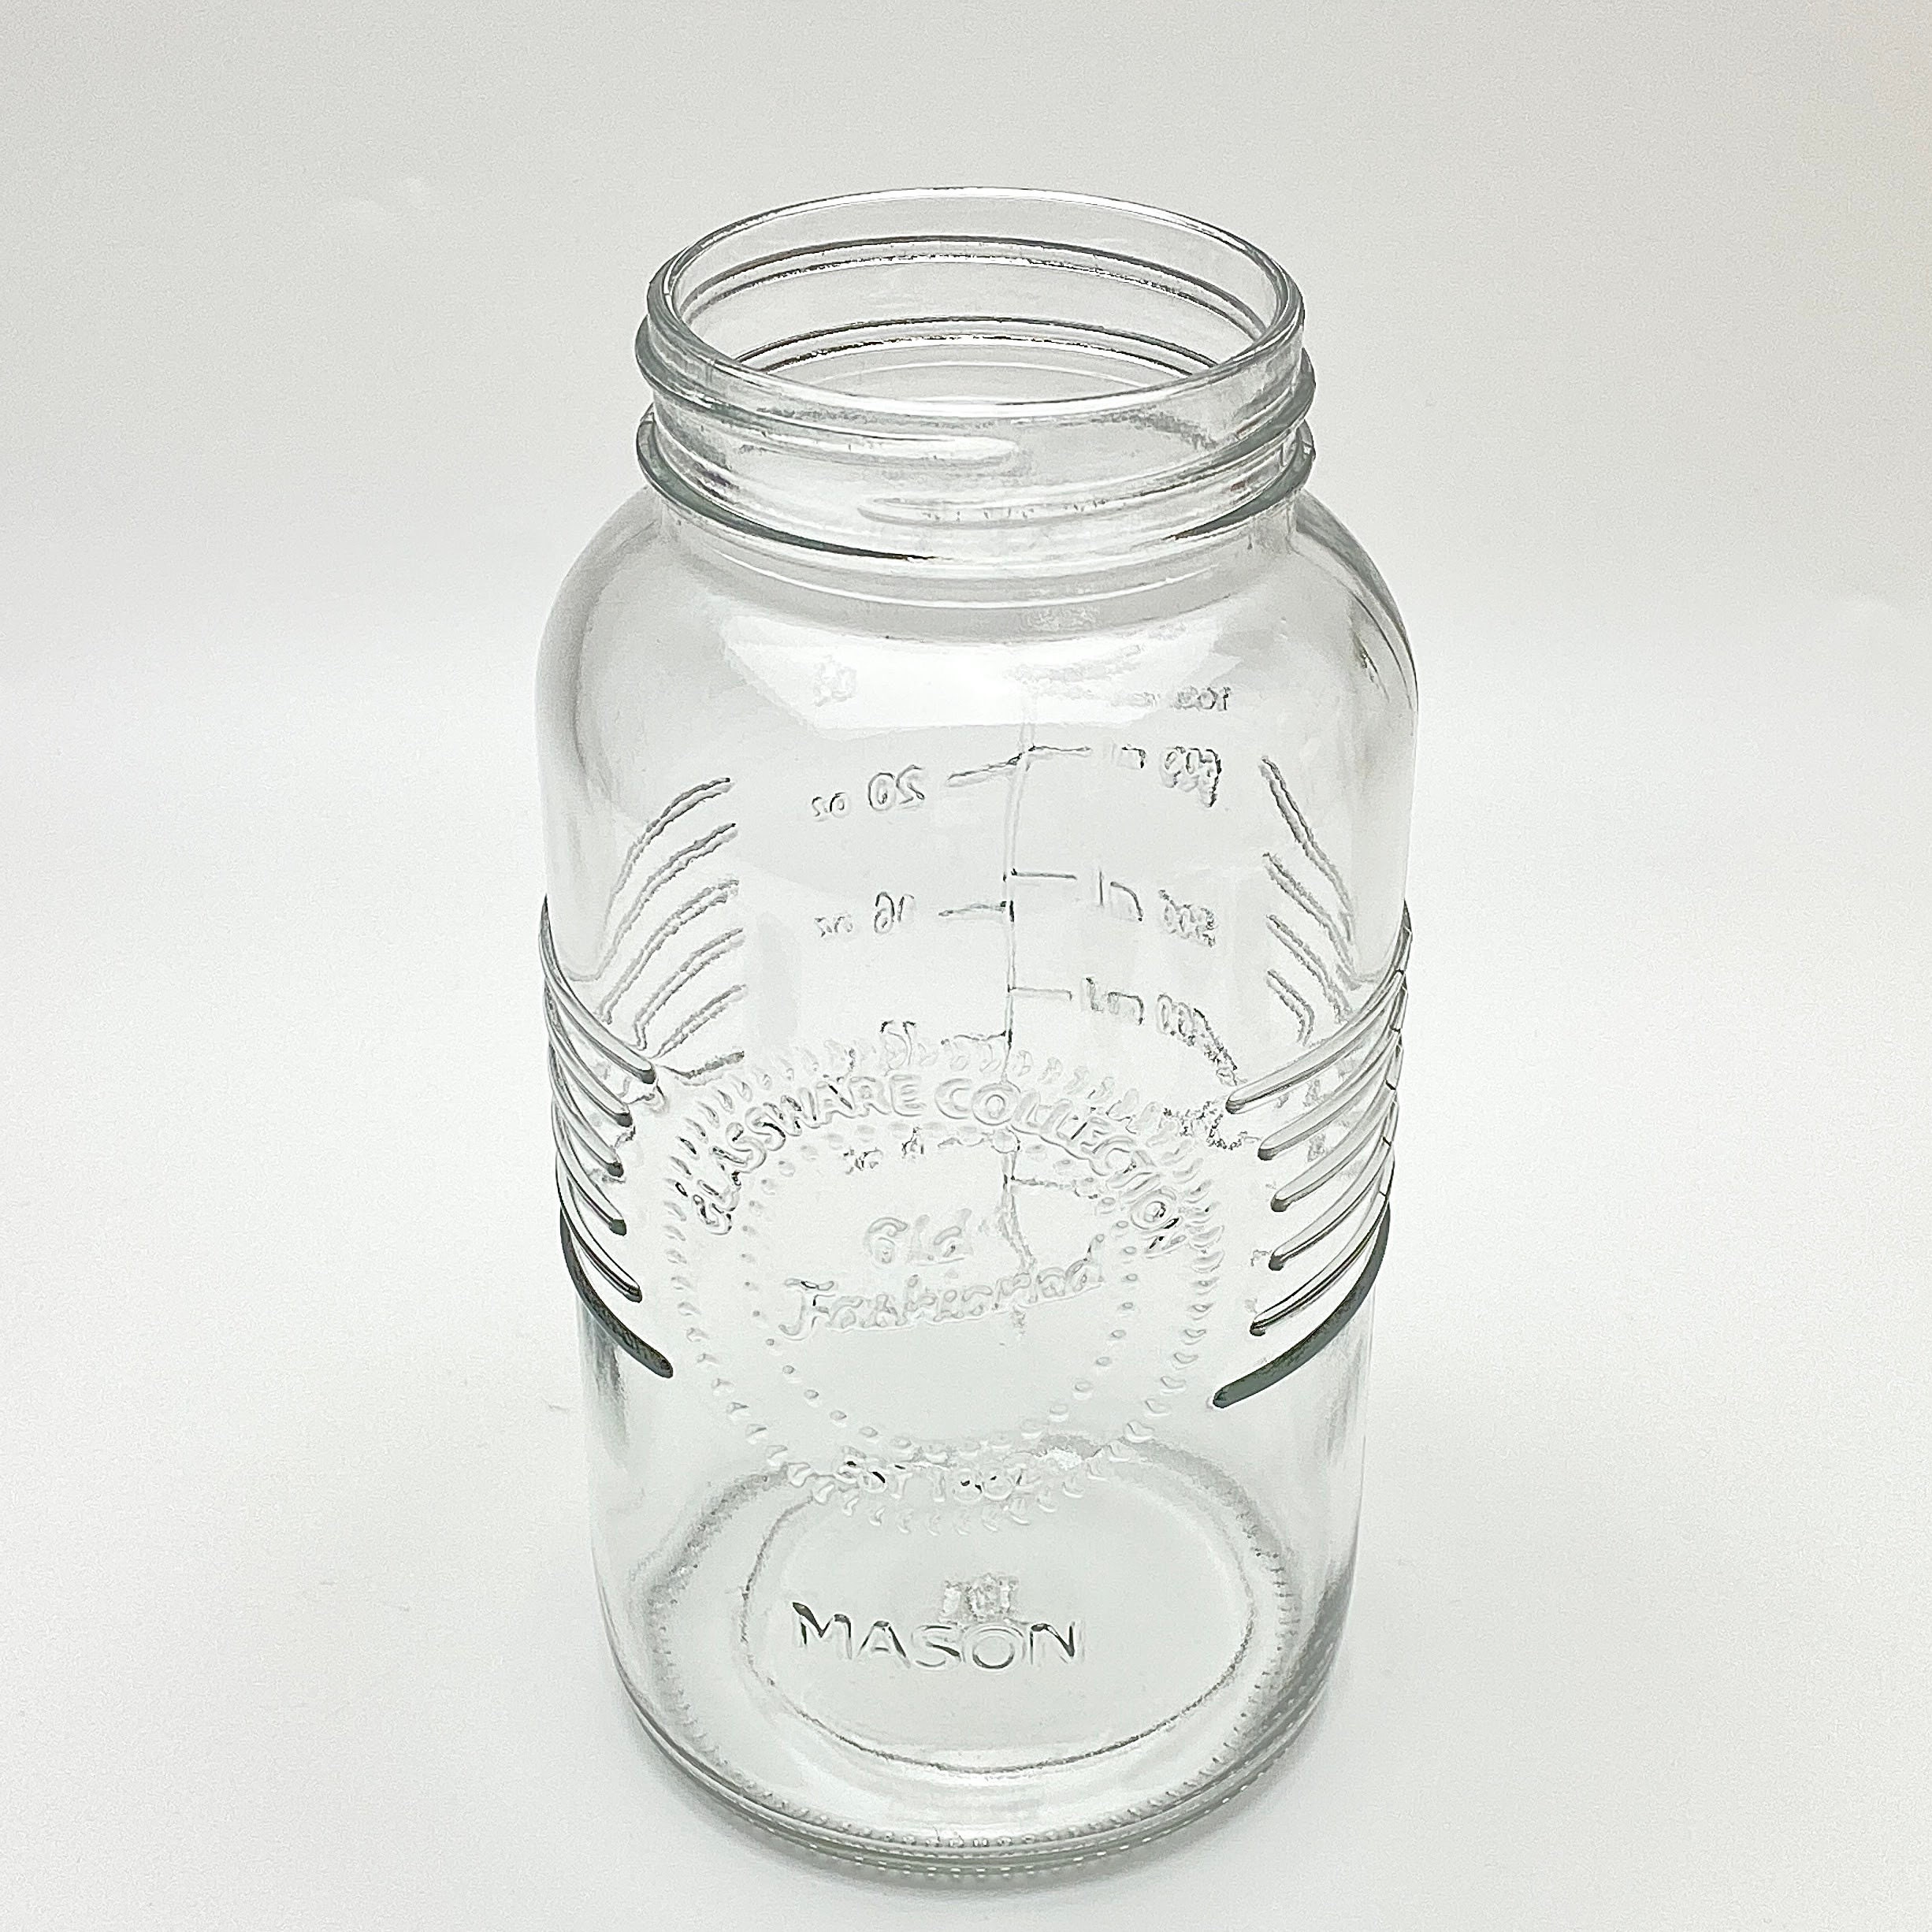 1 Litre Glass Cocktail Shaker Retro in Style the Tumbler Has a Measure Bar  for Guidance. an Extra Silver Screw Cap is Included. 